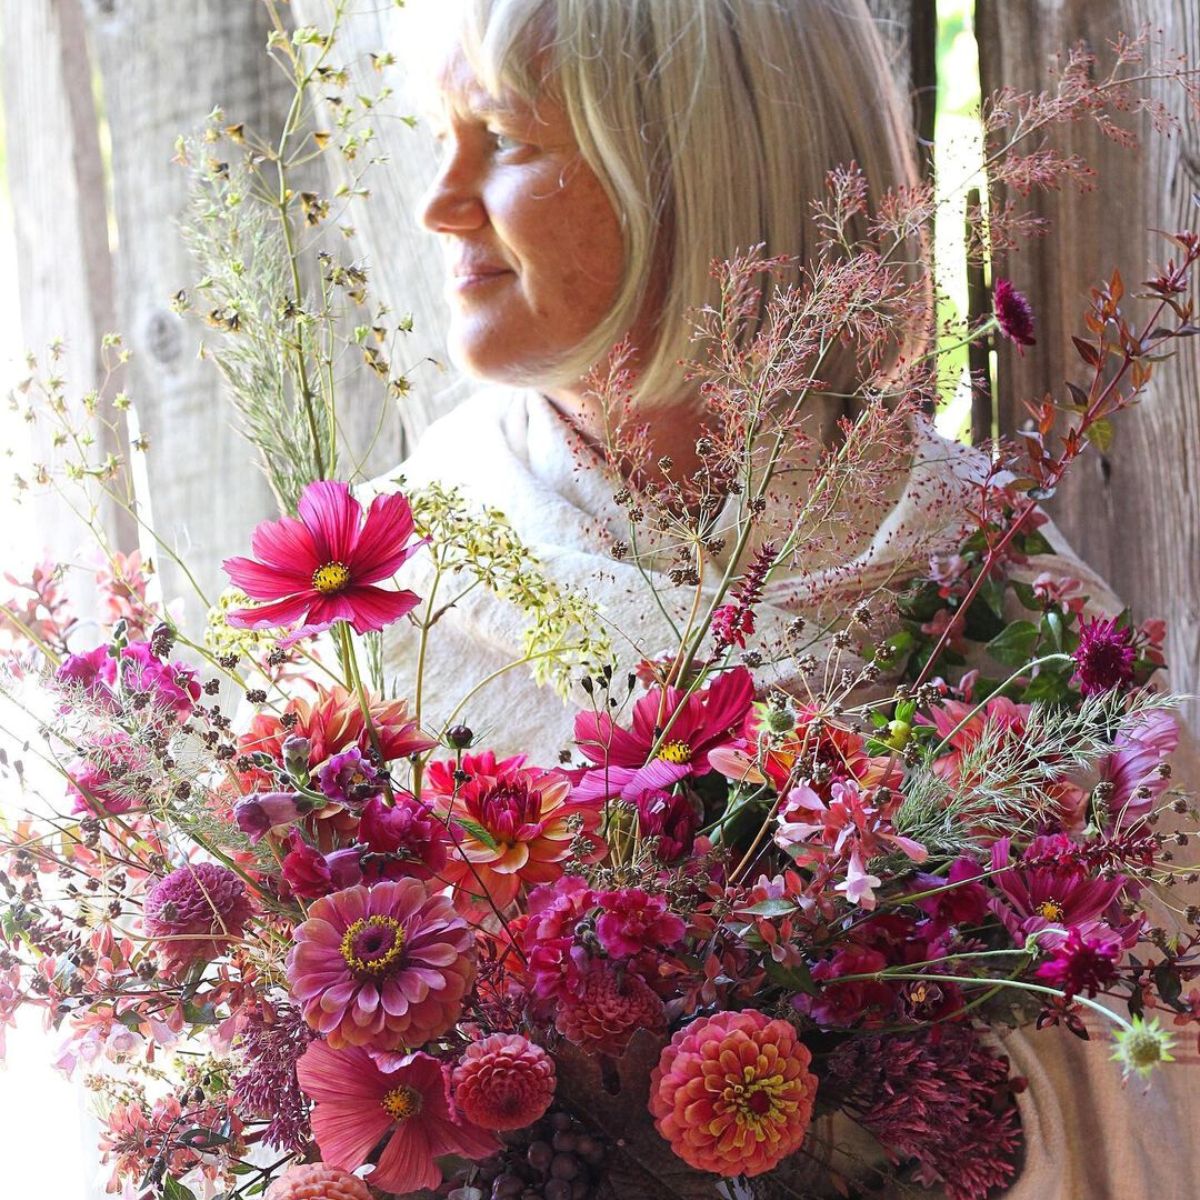 Becky Feasby with a floral arrangement designed by her